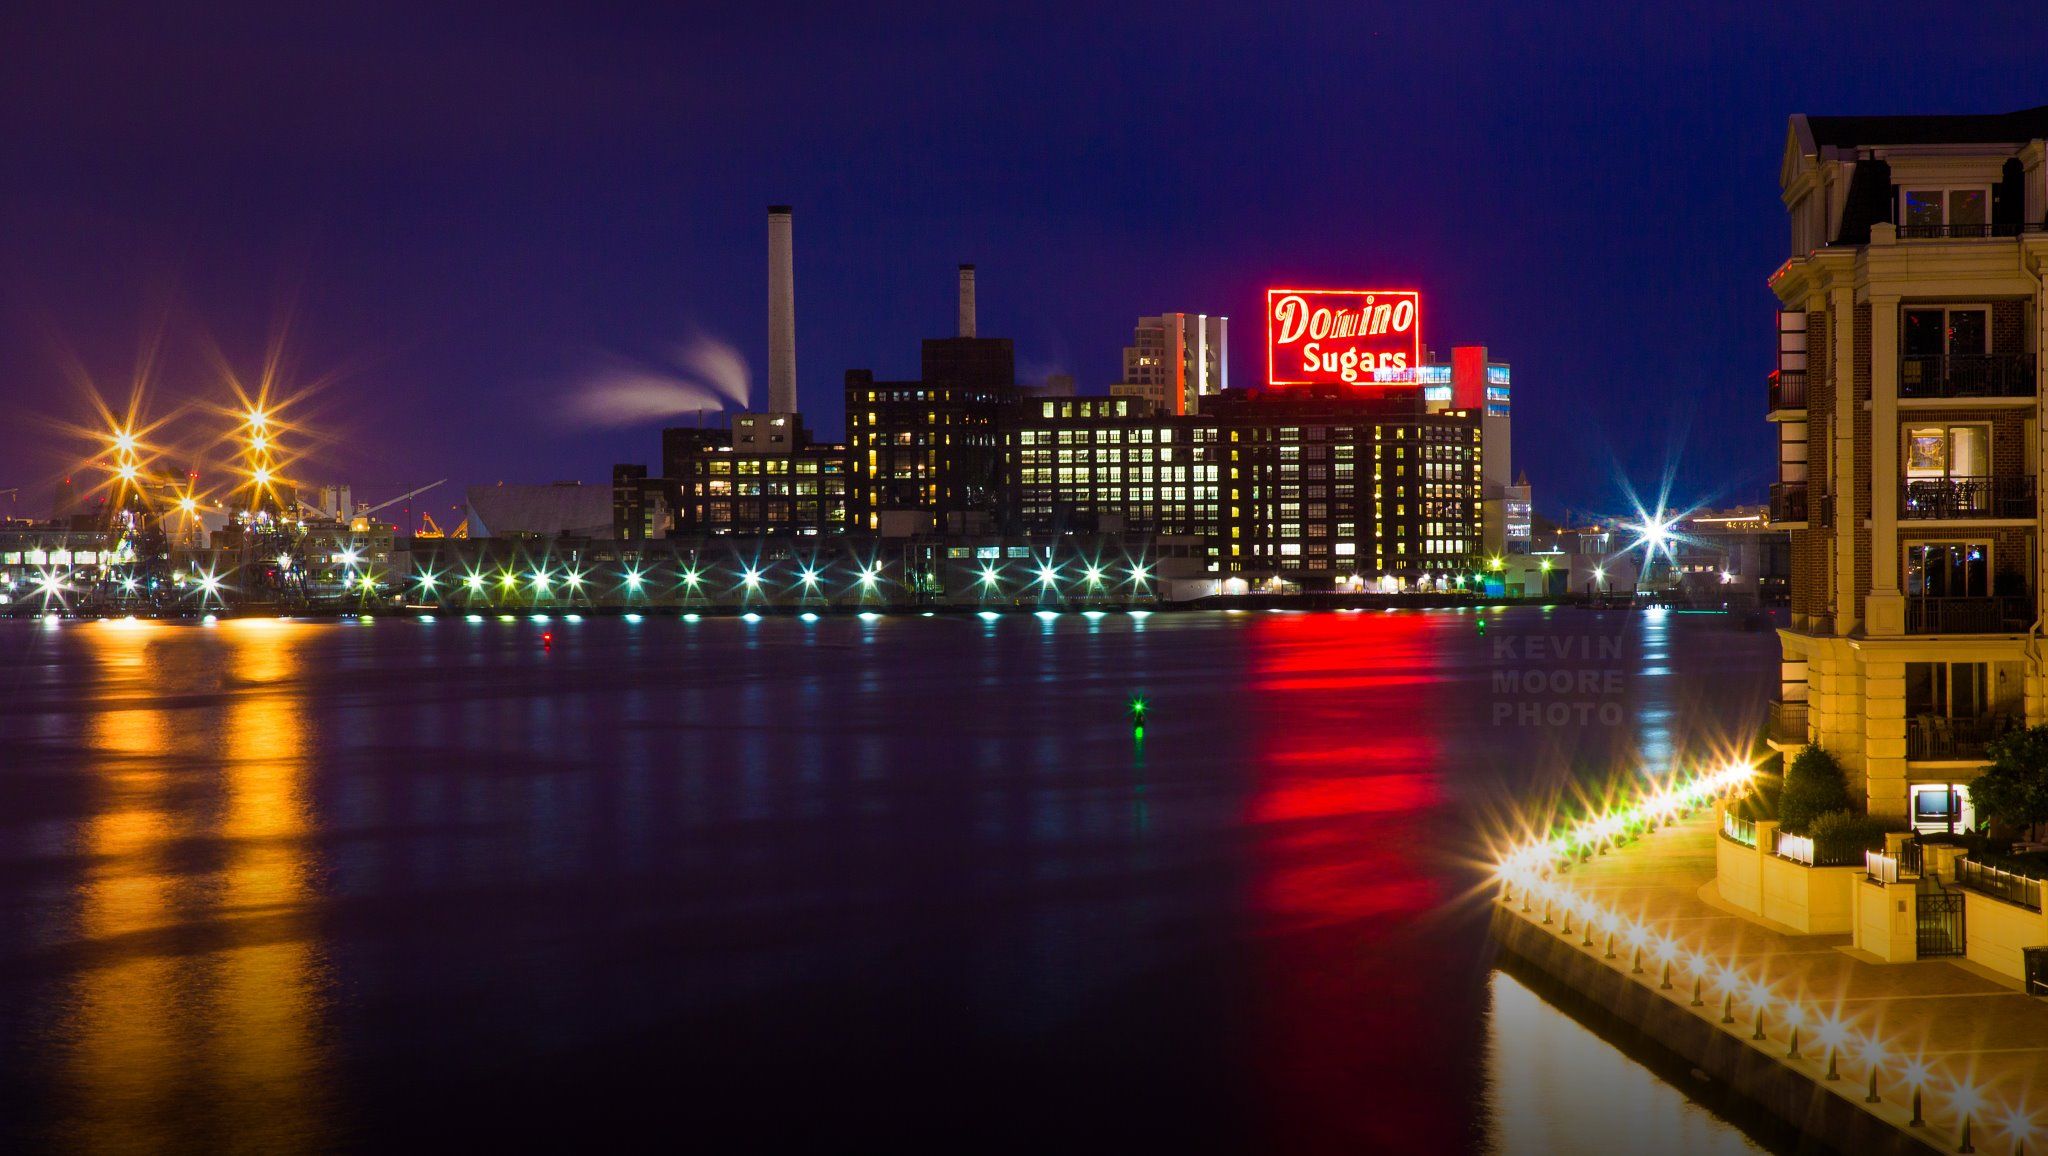 Domino Sugars sign across Baltimore's Inner Harbor. Photo by Kevin ...